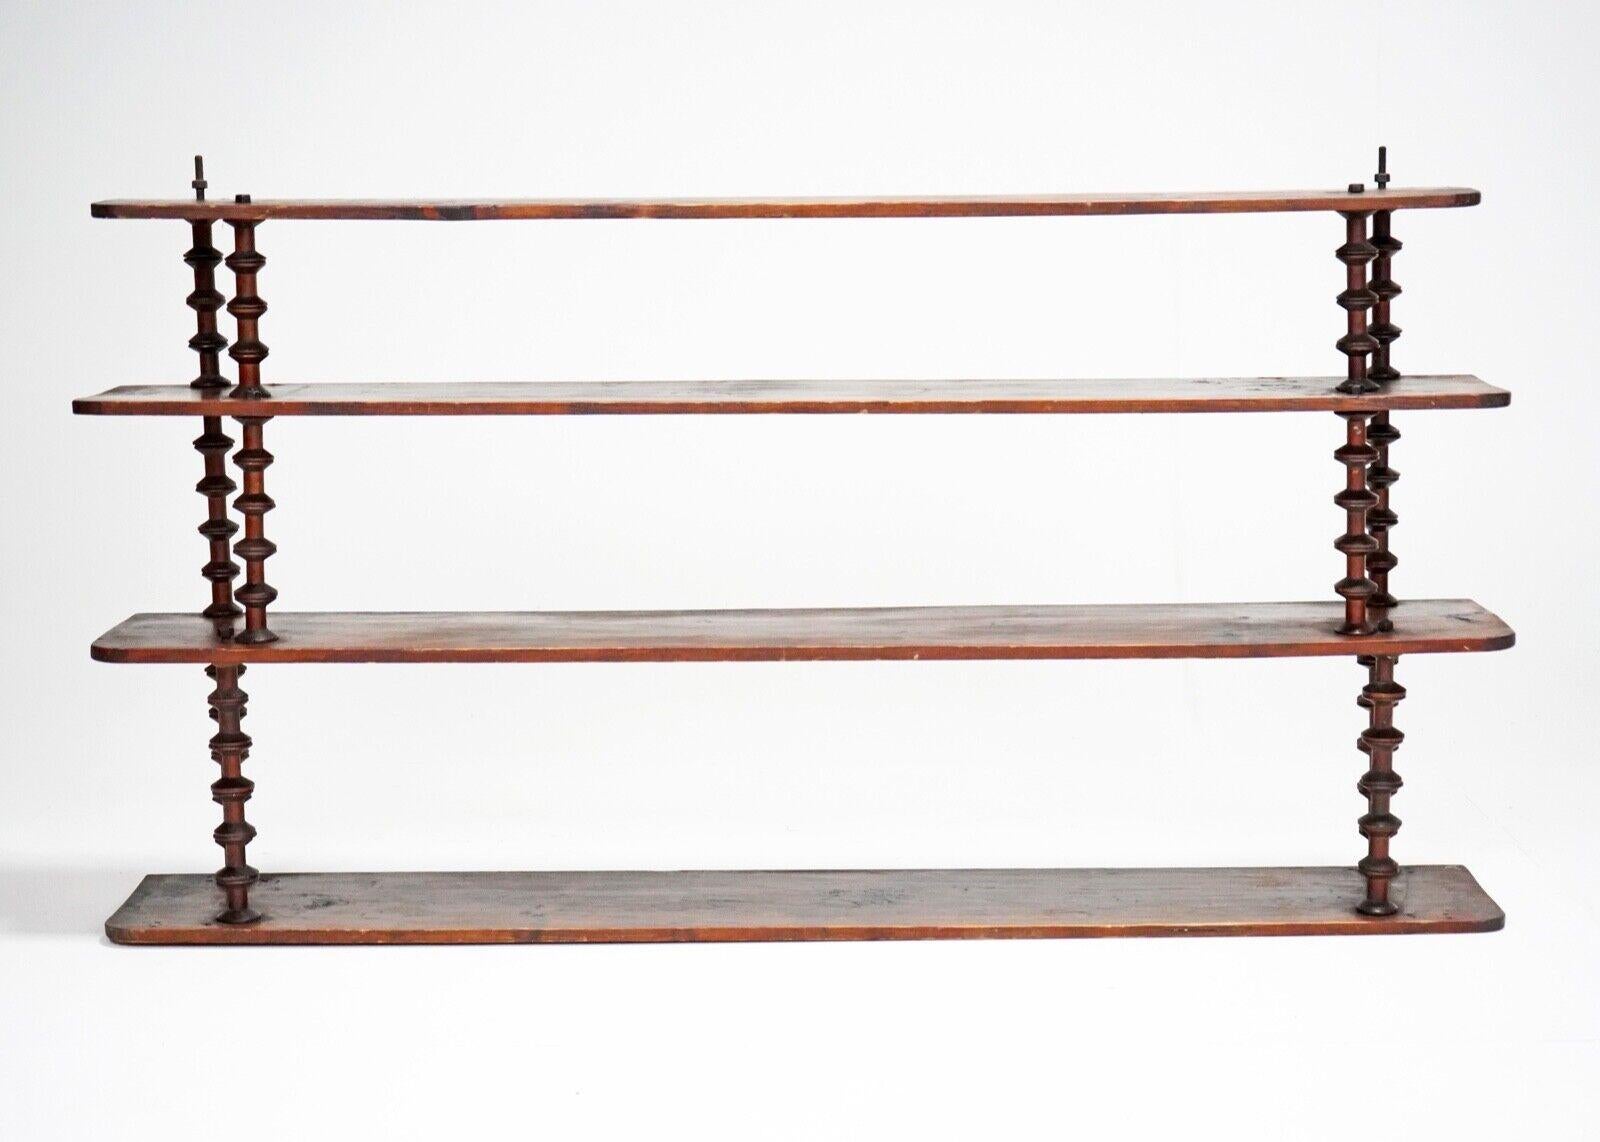 French shelving unit made from bobbin reels. 
Dating from the 1900s. 
This is a exceptionally large four tier shelving unit. 
Its been cleaned and had a wax applied that's bought out the beautiful colour of the wood.

Dimensions

Height -